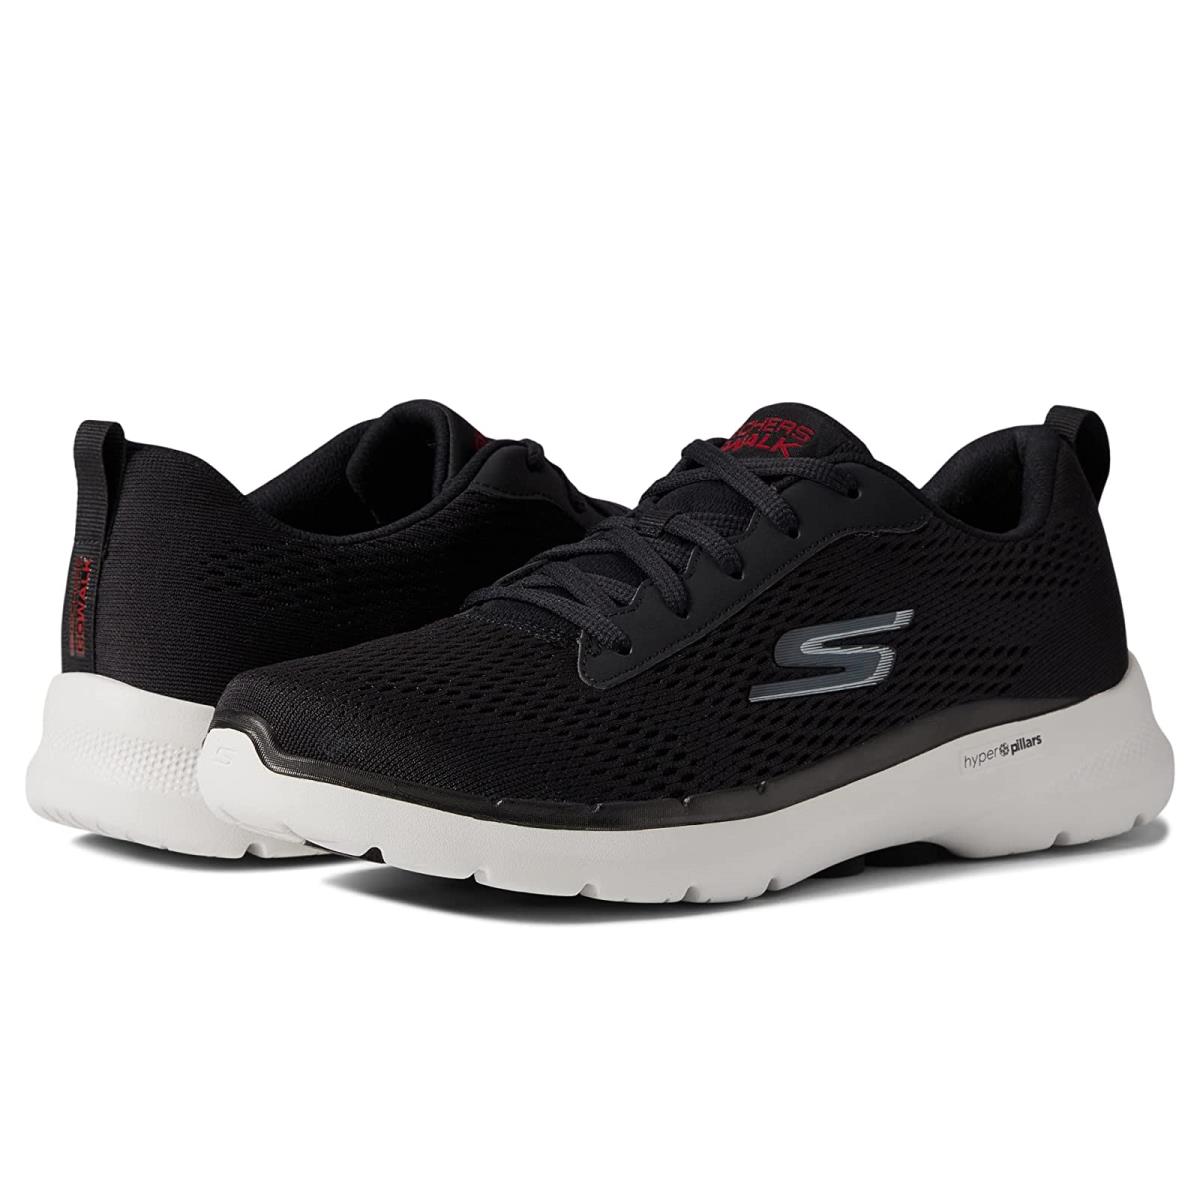 Man`s Sneakers Athletic Shoes Skechers Performance Go Walk 6 - 216209 Black/White